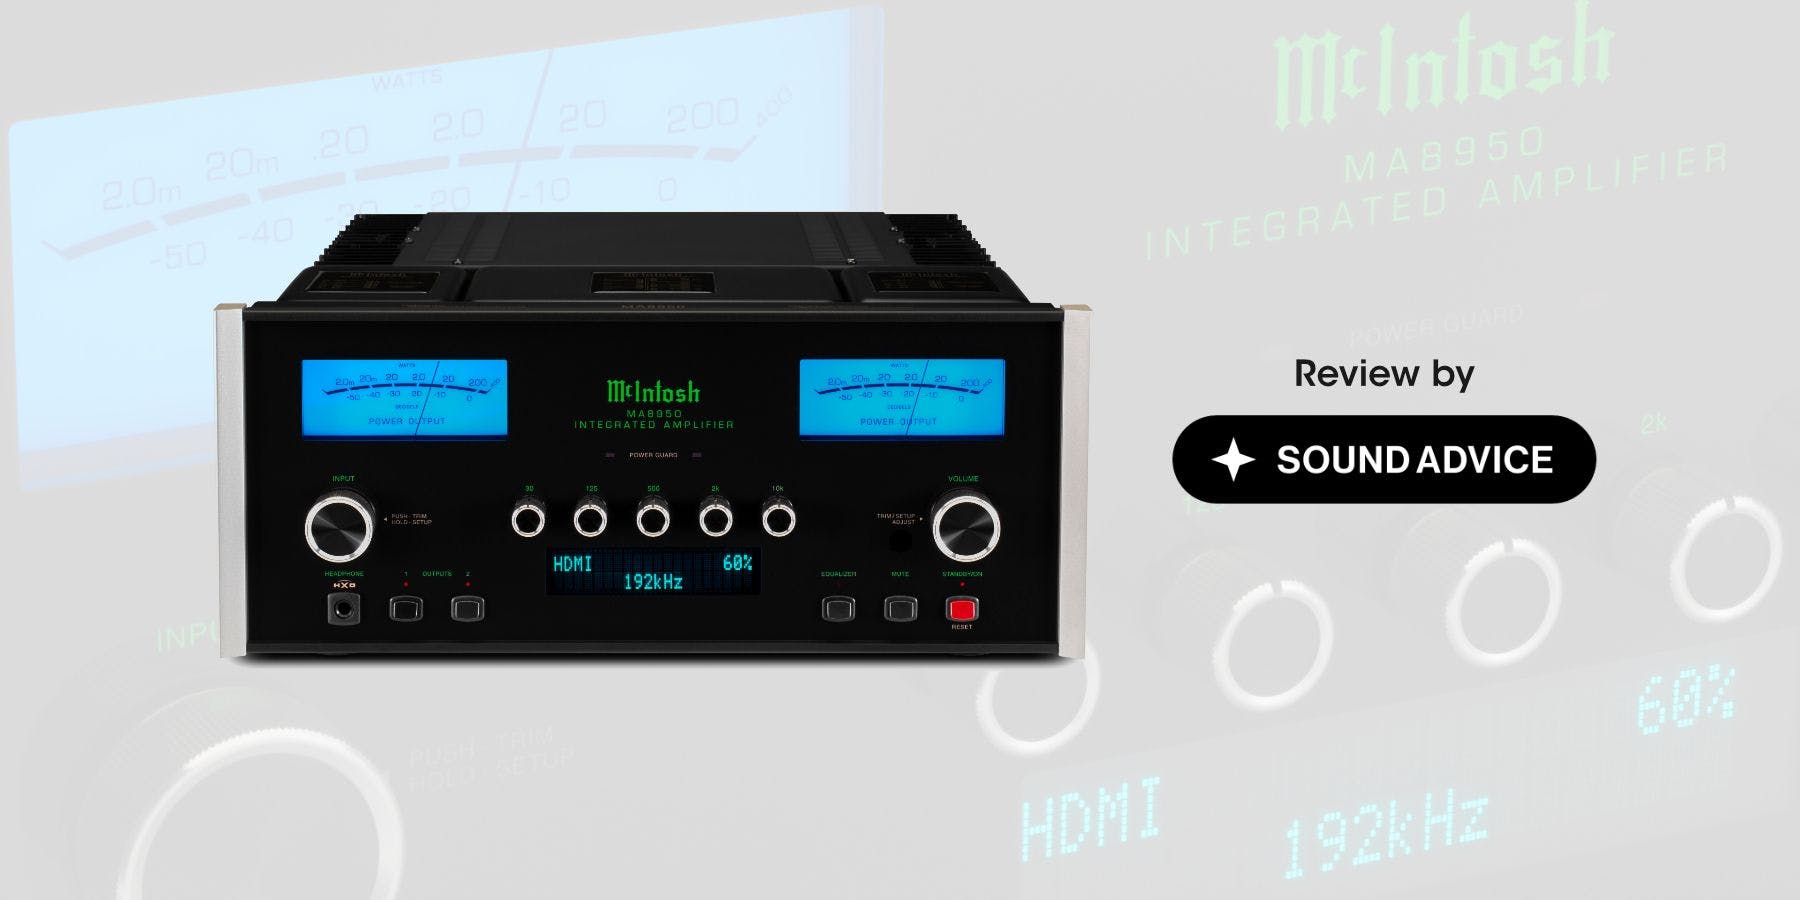 Sound Advice reviews the McIntosh MA8950 Integrated Amplifier